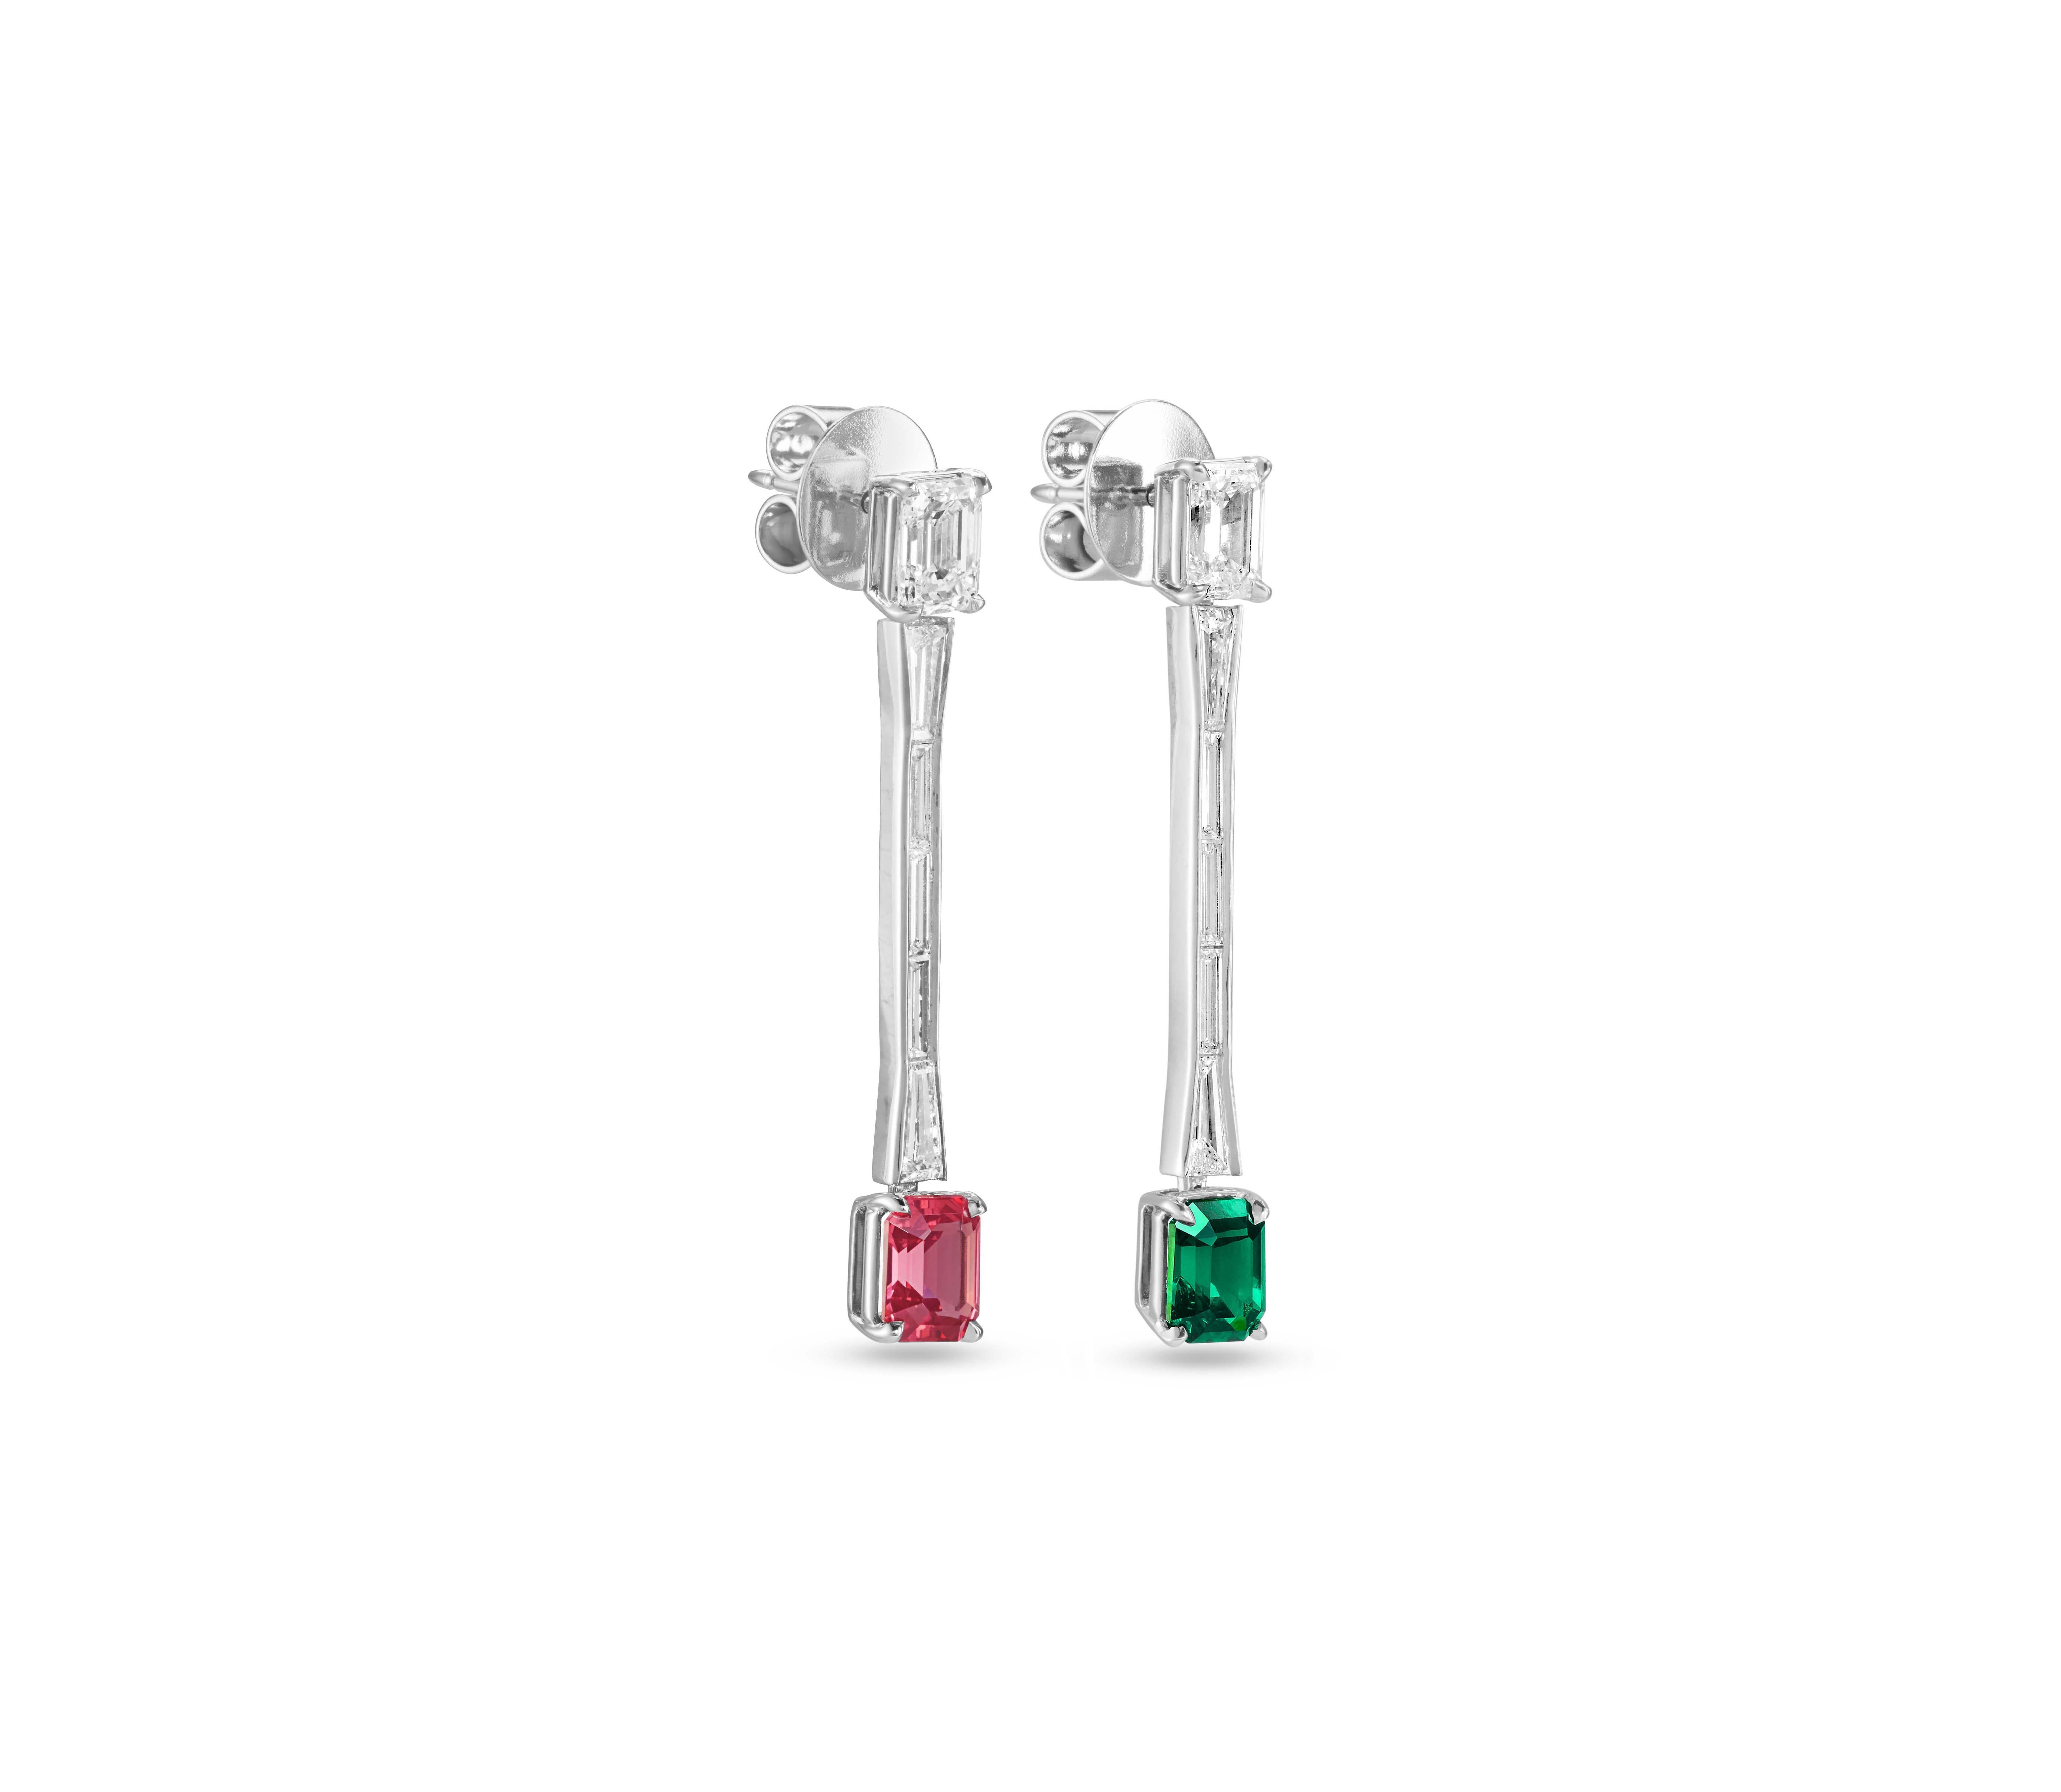 One earring has a 1.18 ct. Tsavorite Garnet and the other earring has a 1.08 ct. Mahenge Spinel.
The total diamond weight is 2.61 ct.: 1.44 ct. emerald-cut E VVS diamonds, 0.67 ct. tapered baguette E VVS-VS diamonds, 0.50 ct. baguette-cut F VS